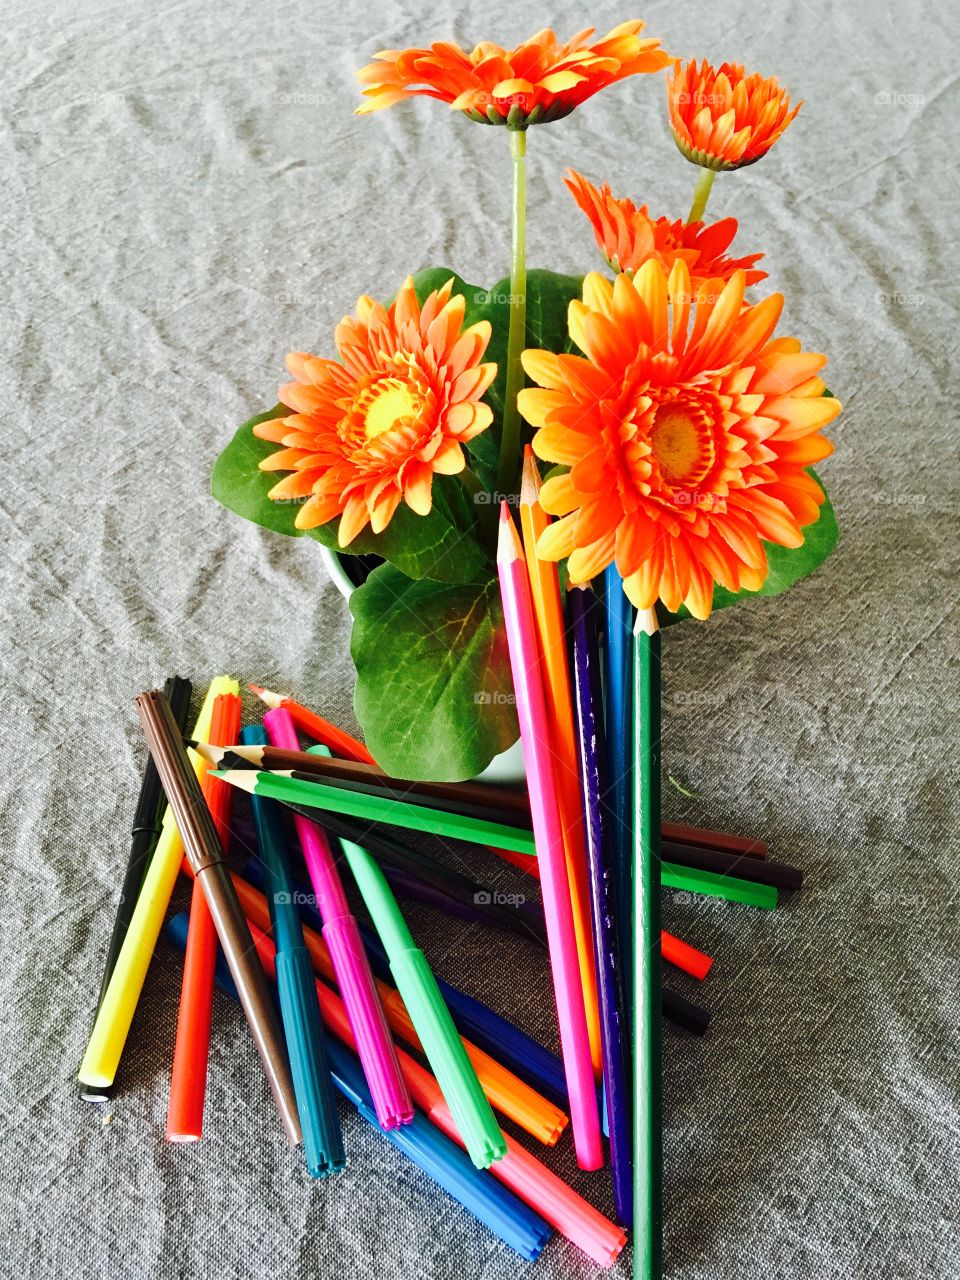 Colorful pencils with flower pot